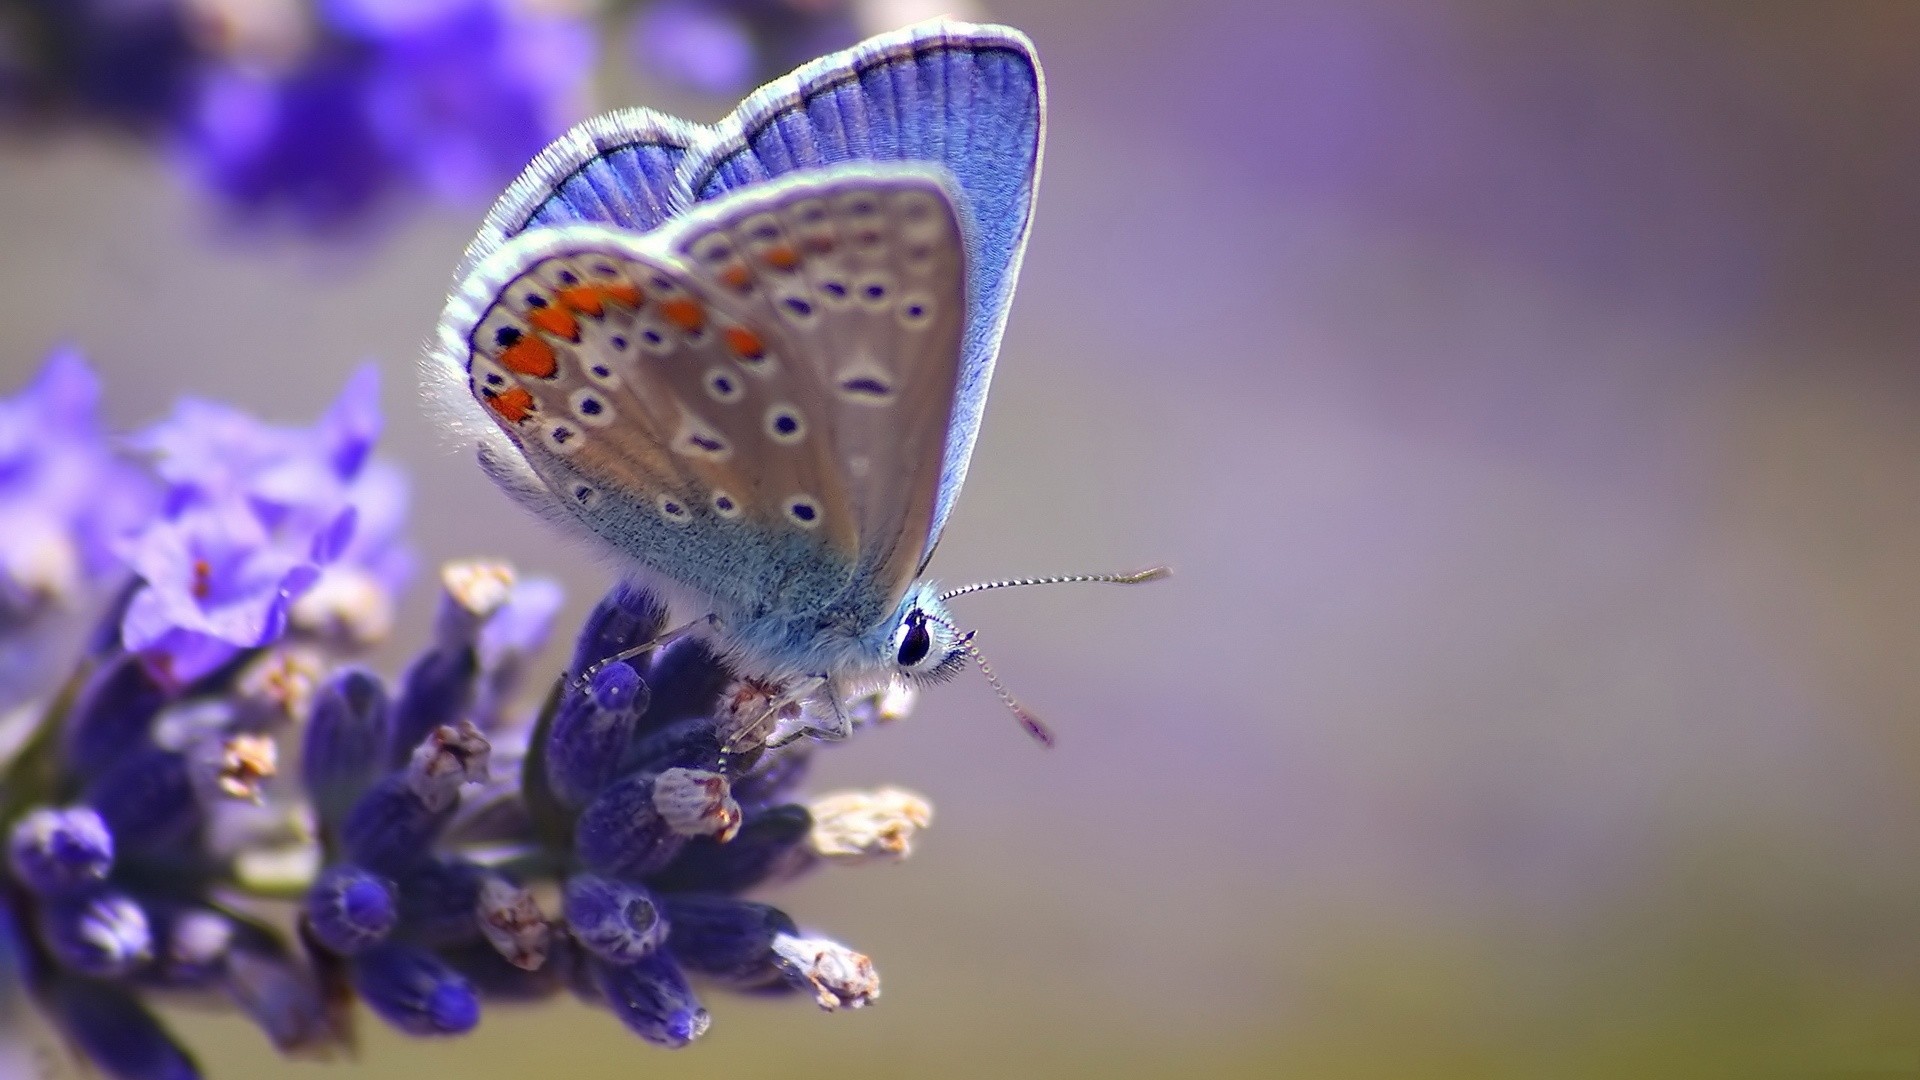 1920x1080 Tags:  Butterfly